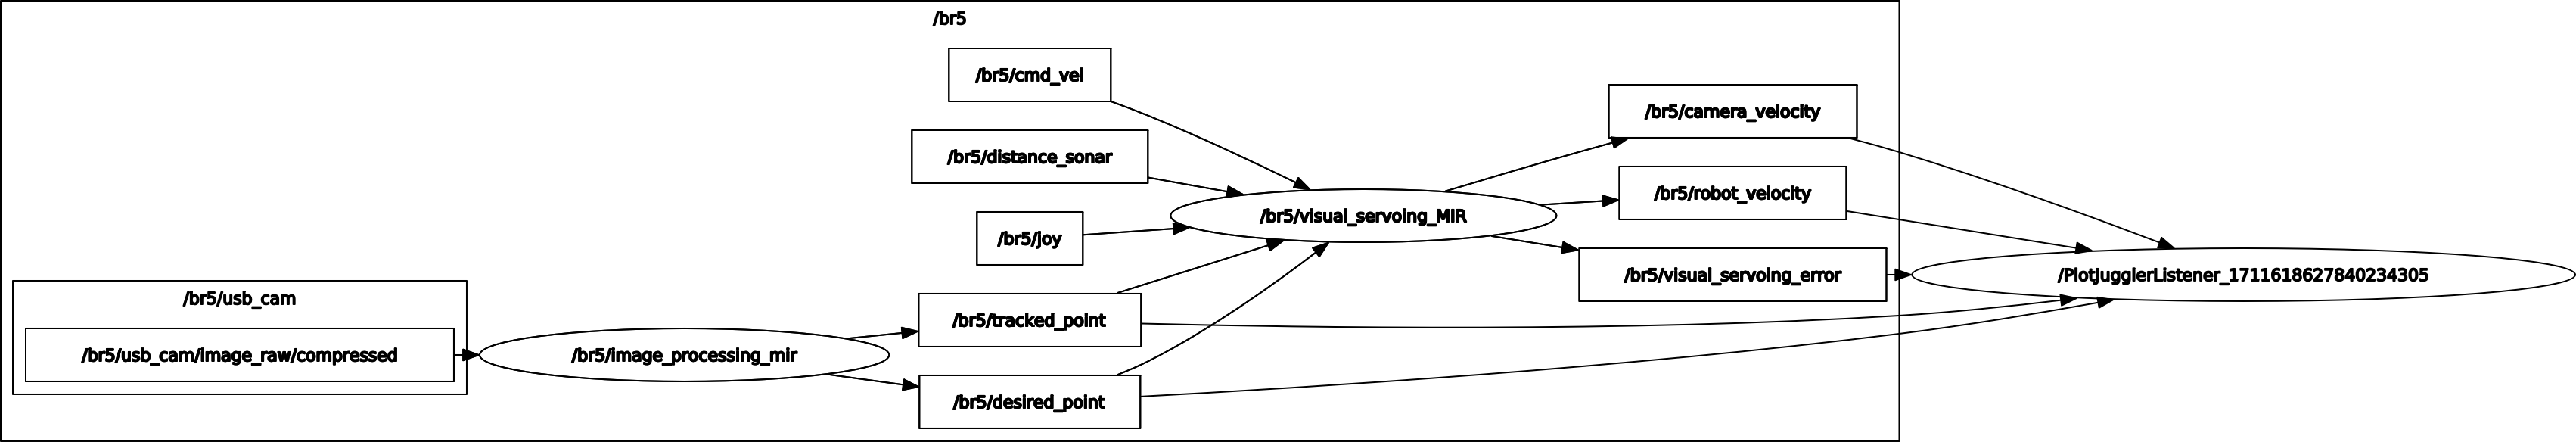 rosgraph_visual_servoing.png